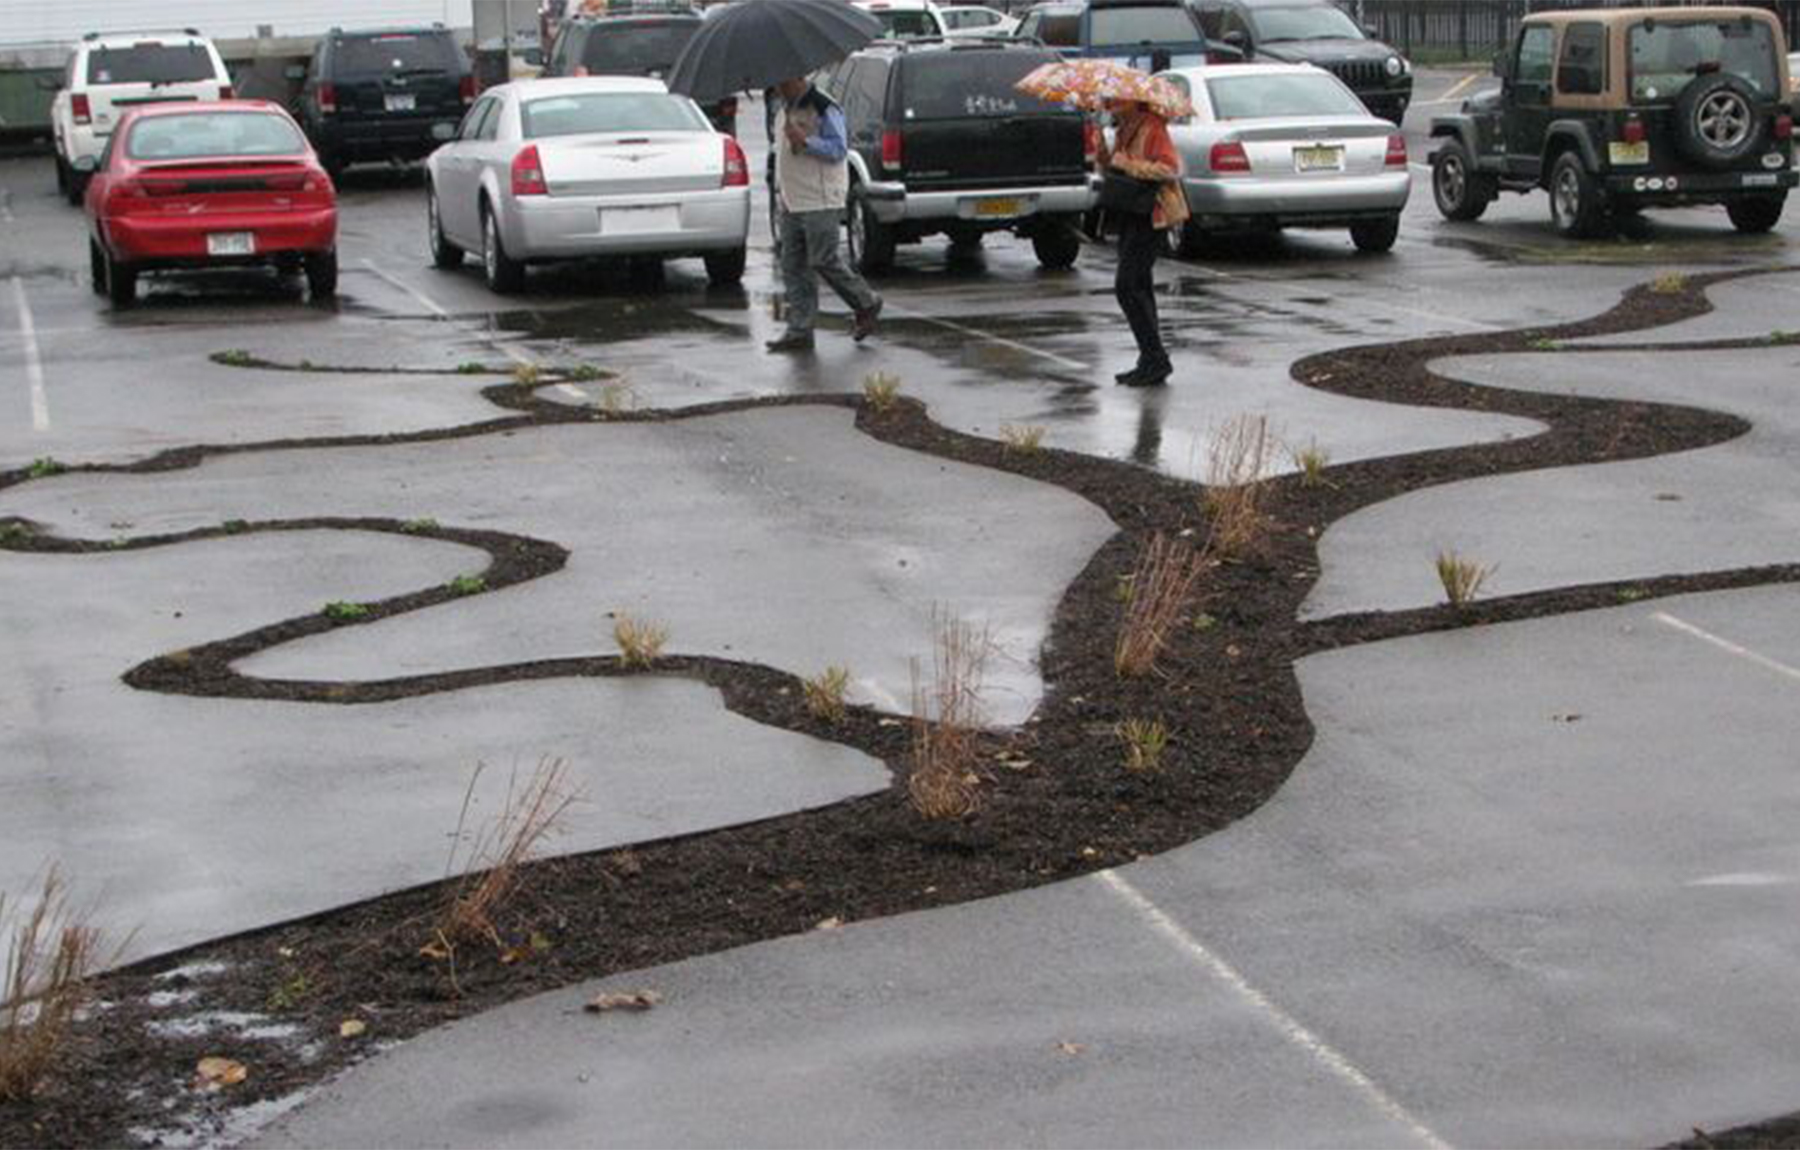 Meandering soil formations in the concrete - Dendritic Decay Garden